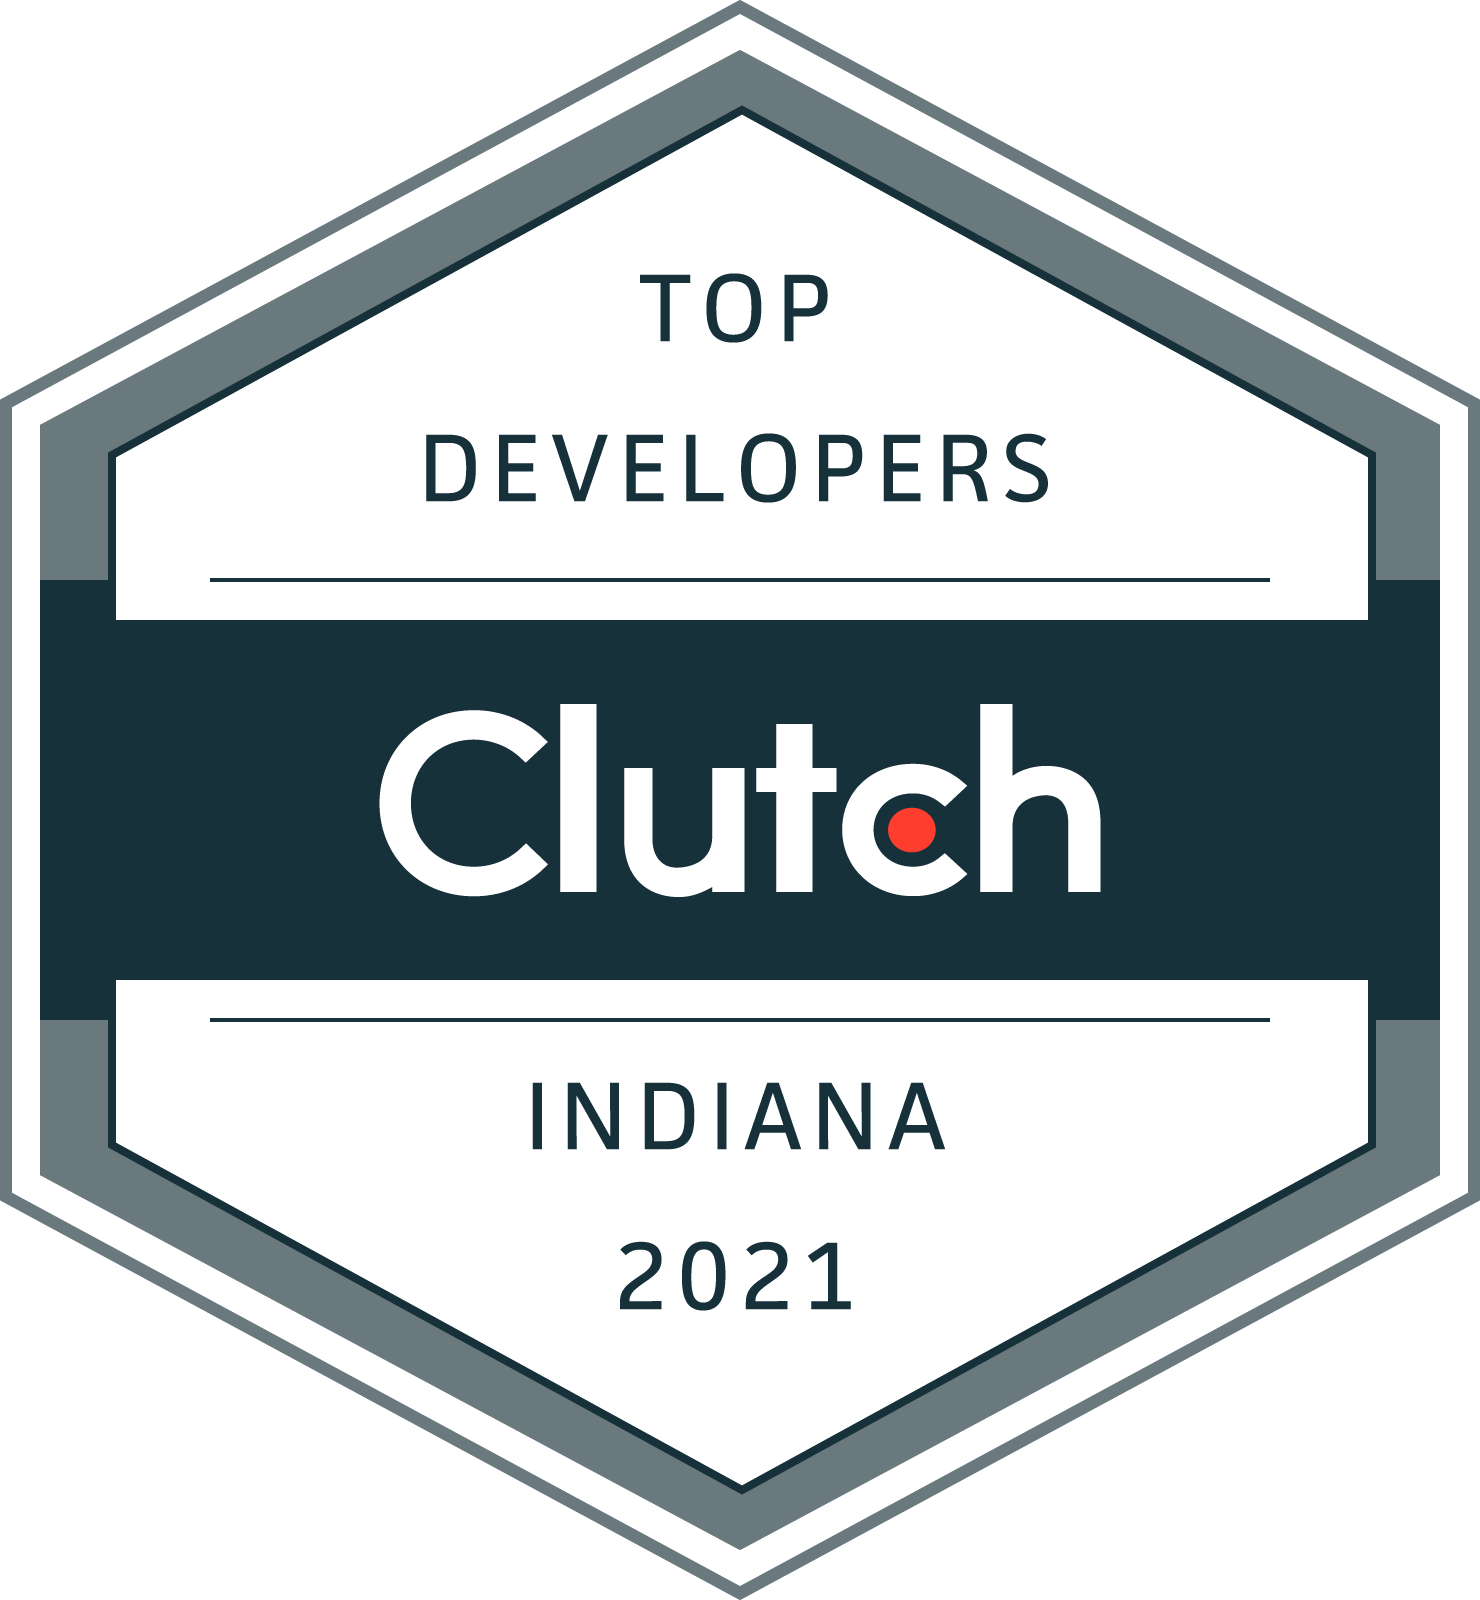 Top software development company in Indiana